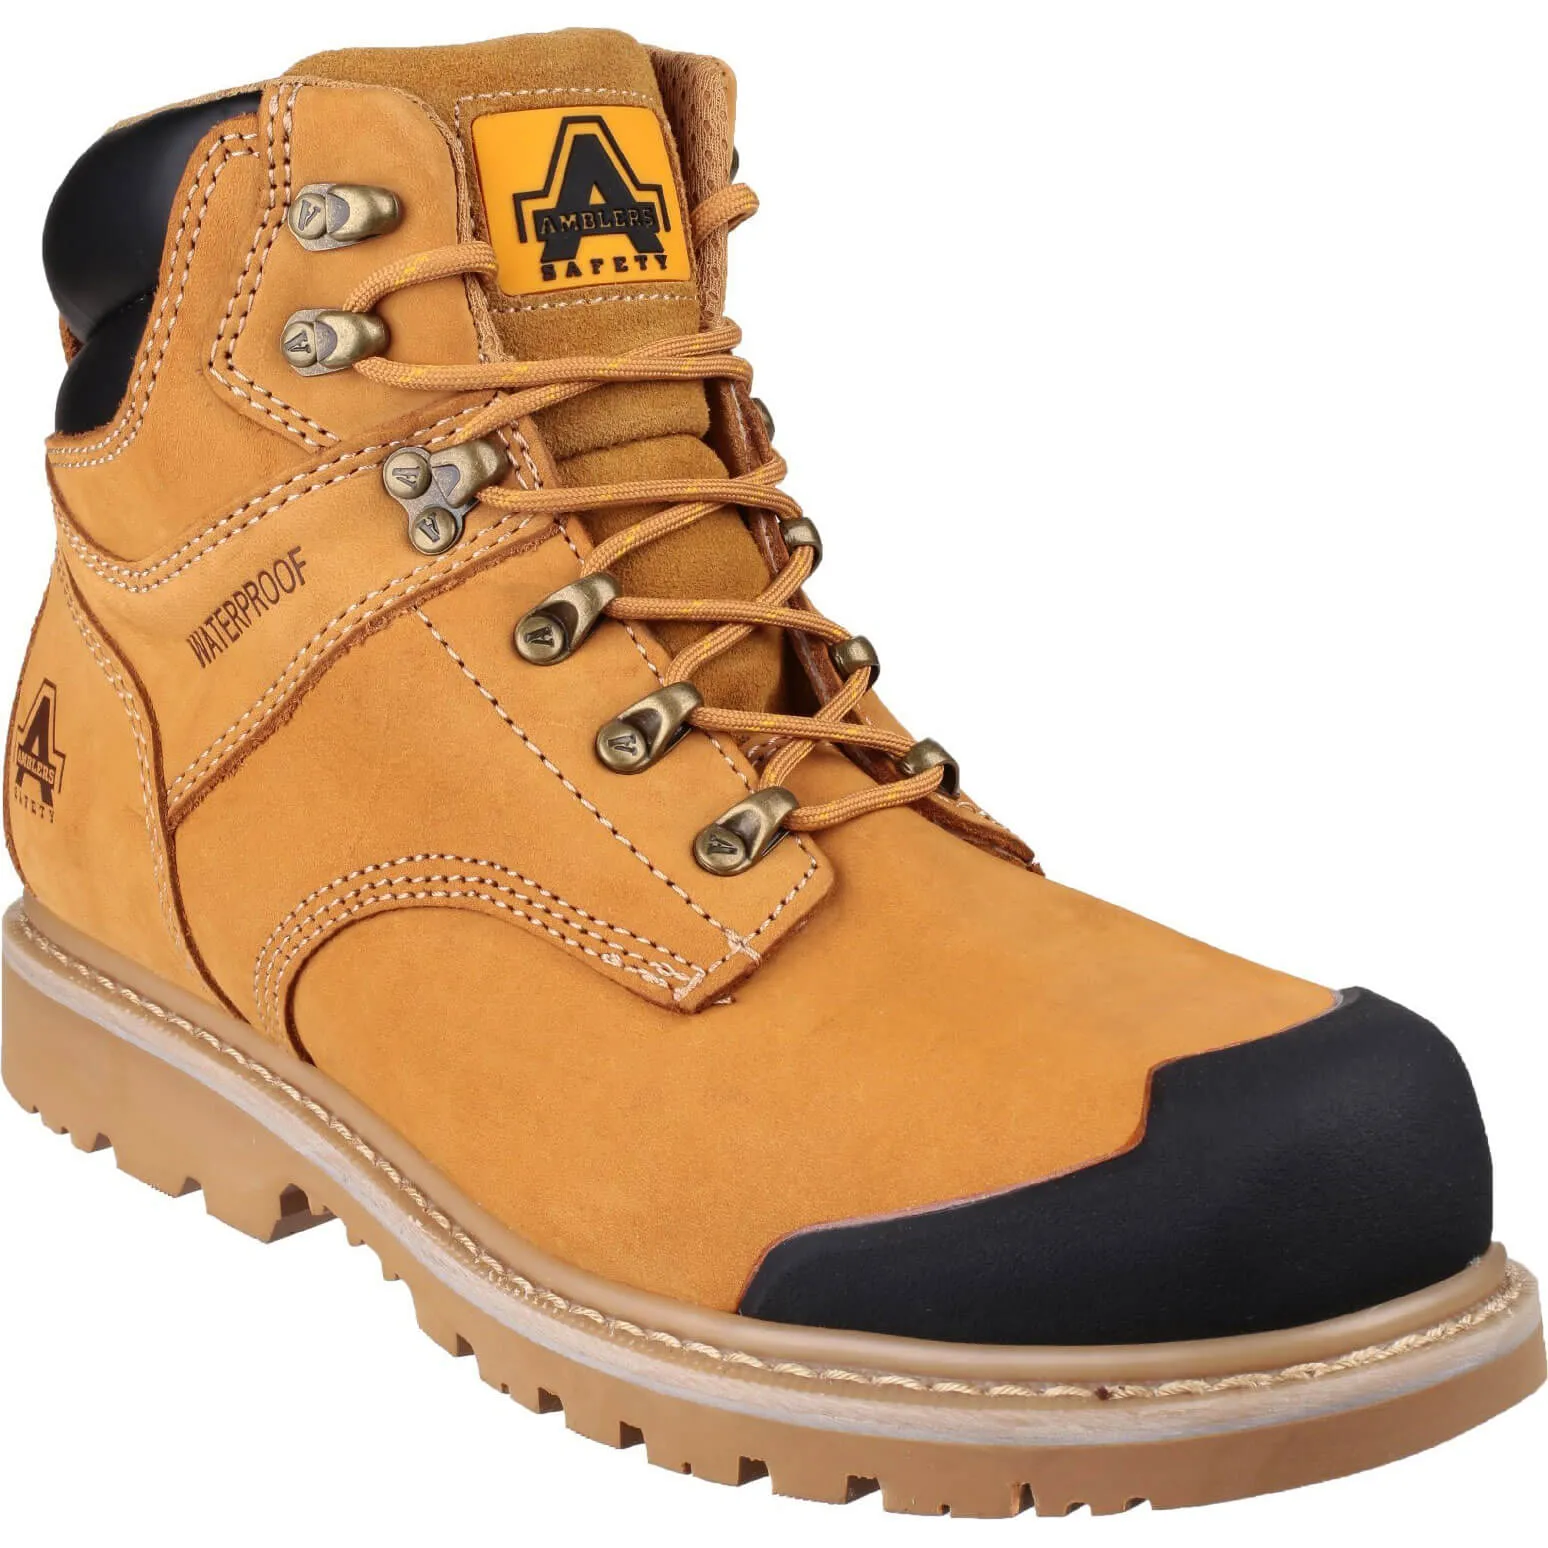 Amblers Mens Safety FS226 Goodyear Welted Waterproof Industrial Safety Boots - Honey, Size 8